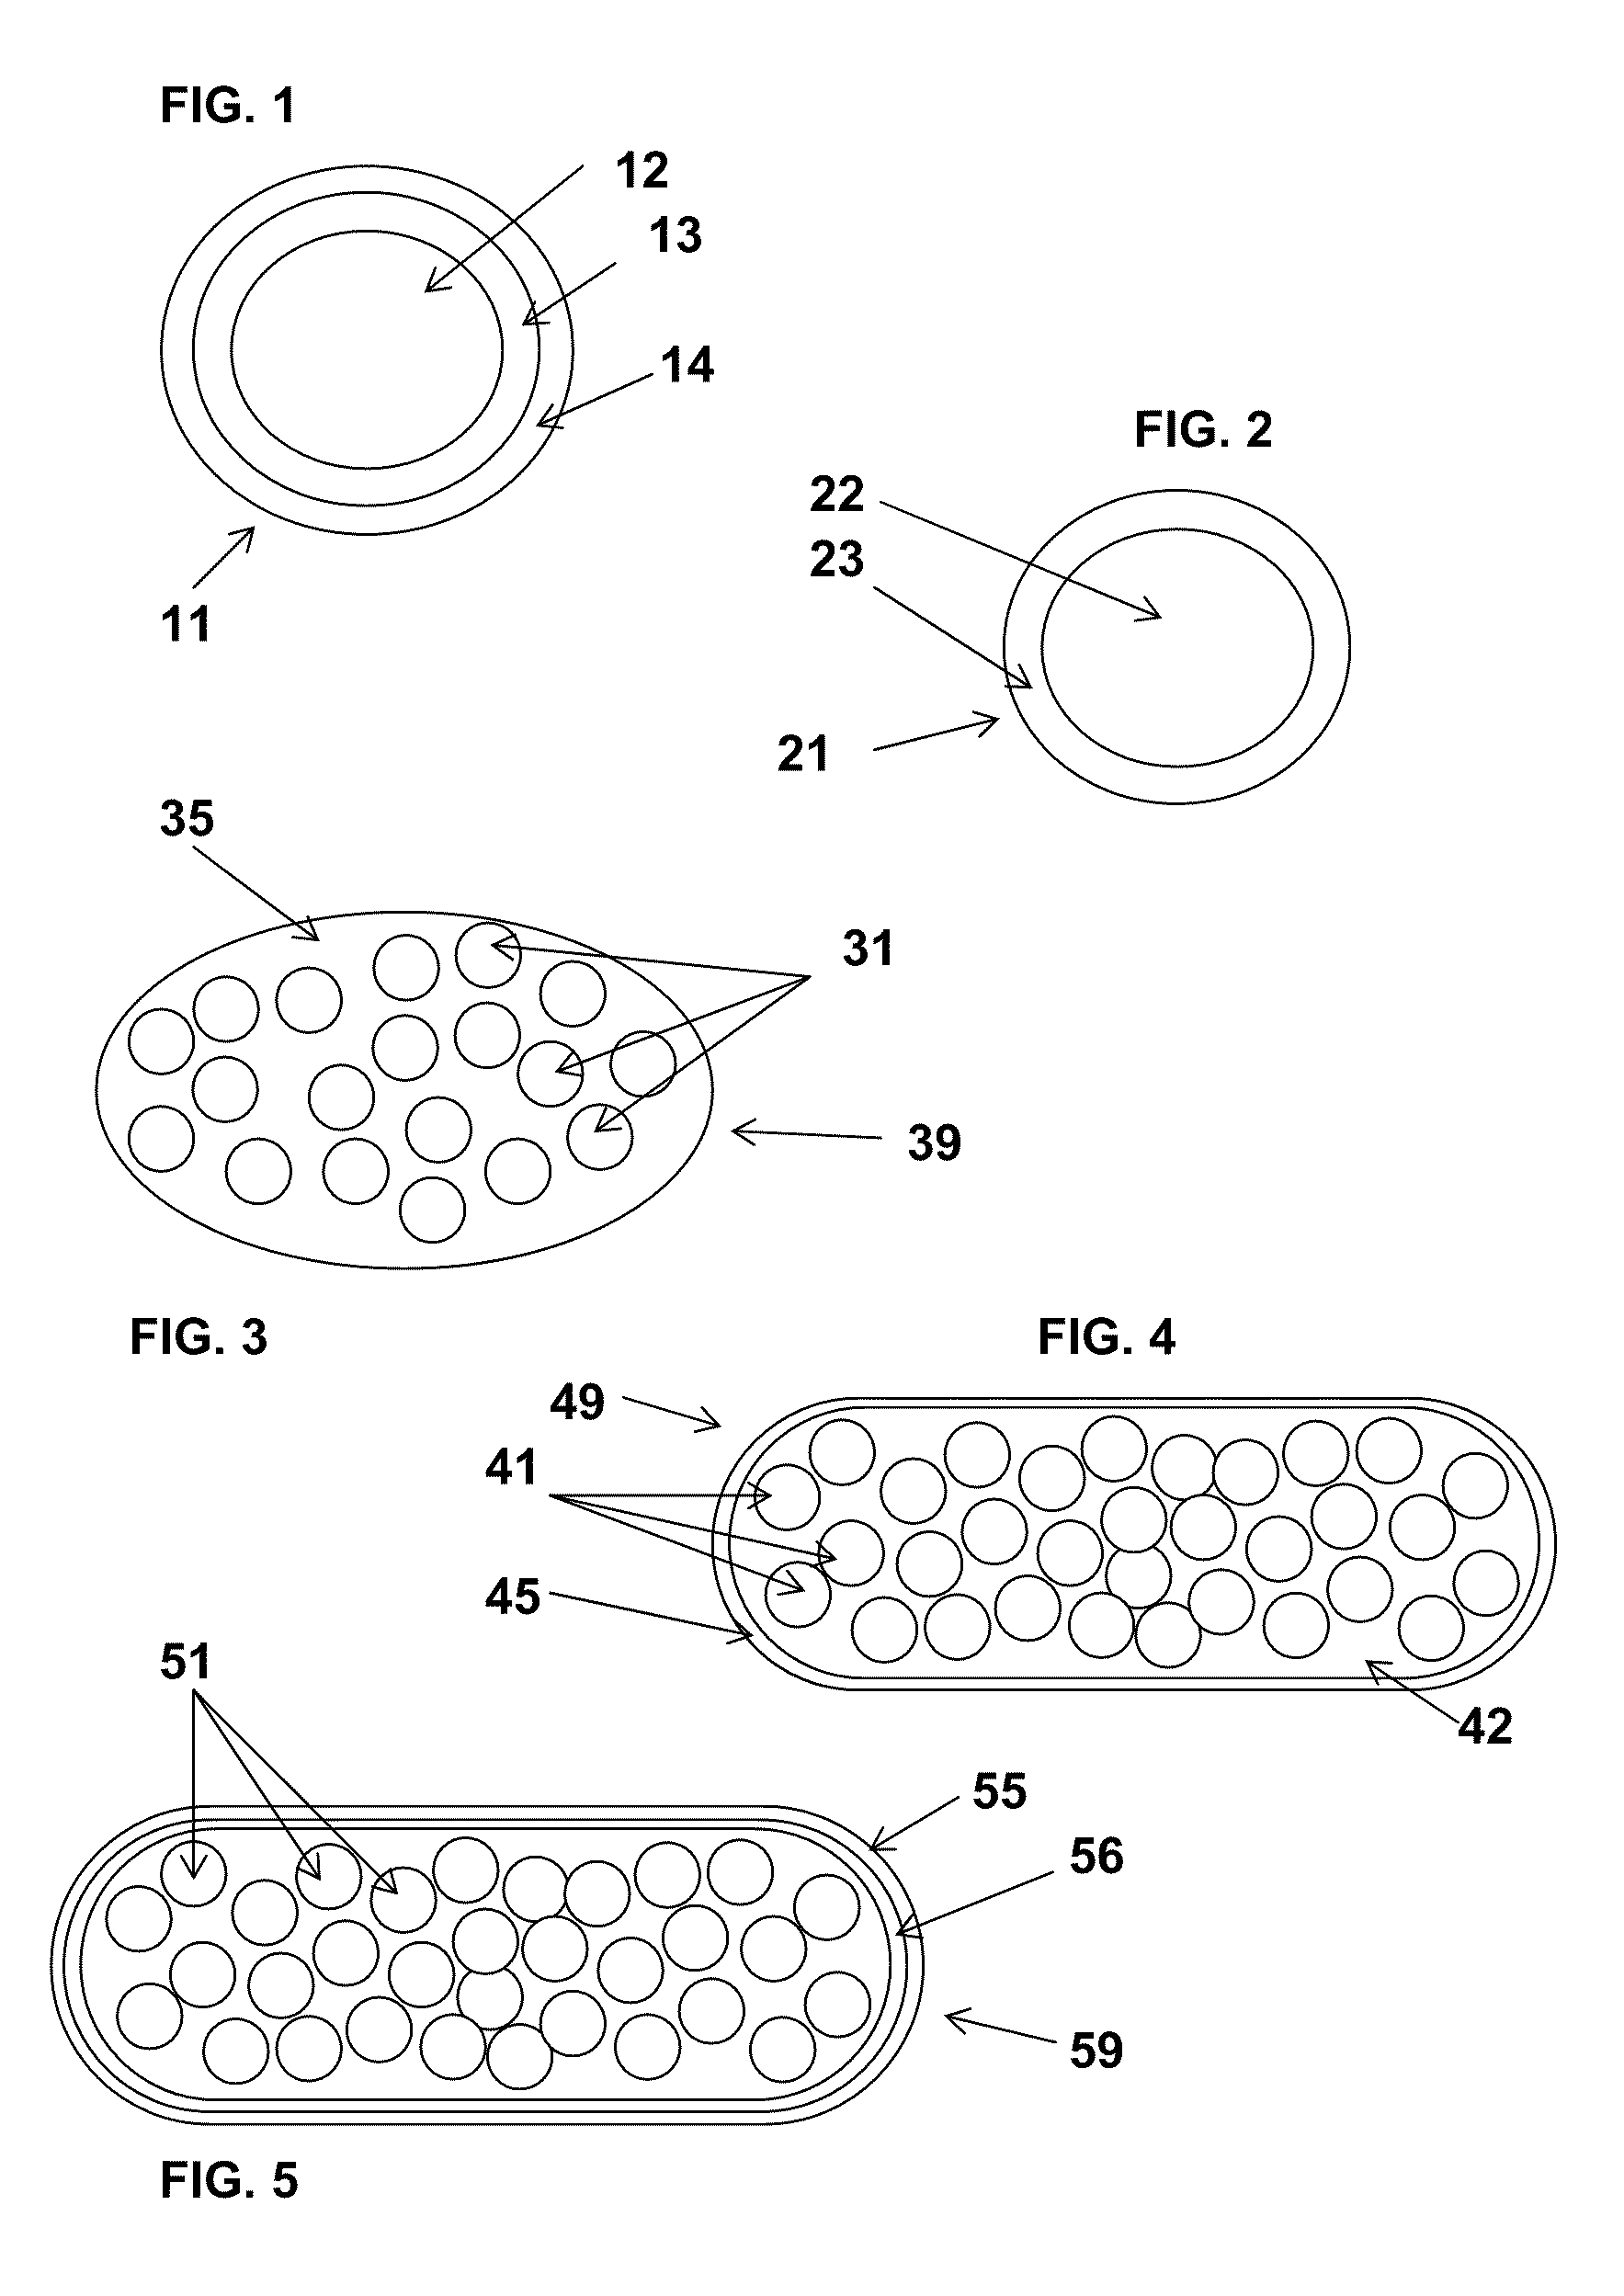 Multimicroparticulate pharmaceutical forms for oral administration